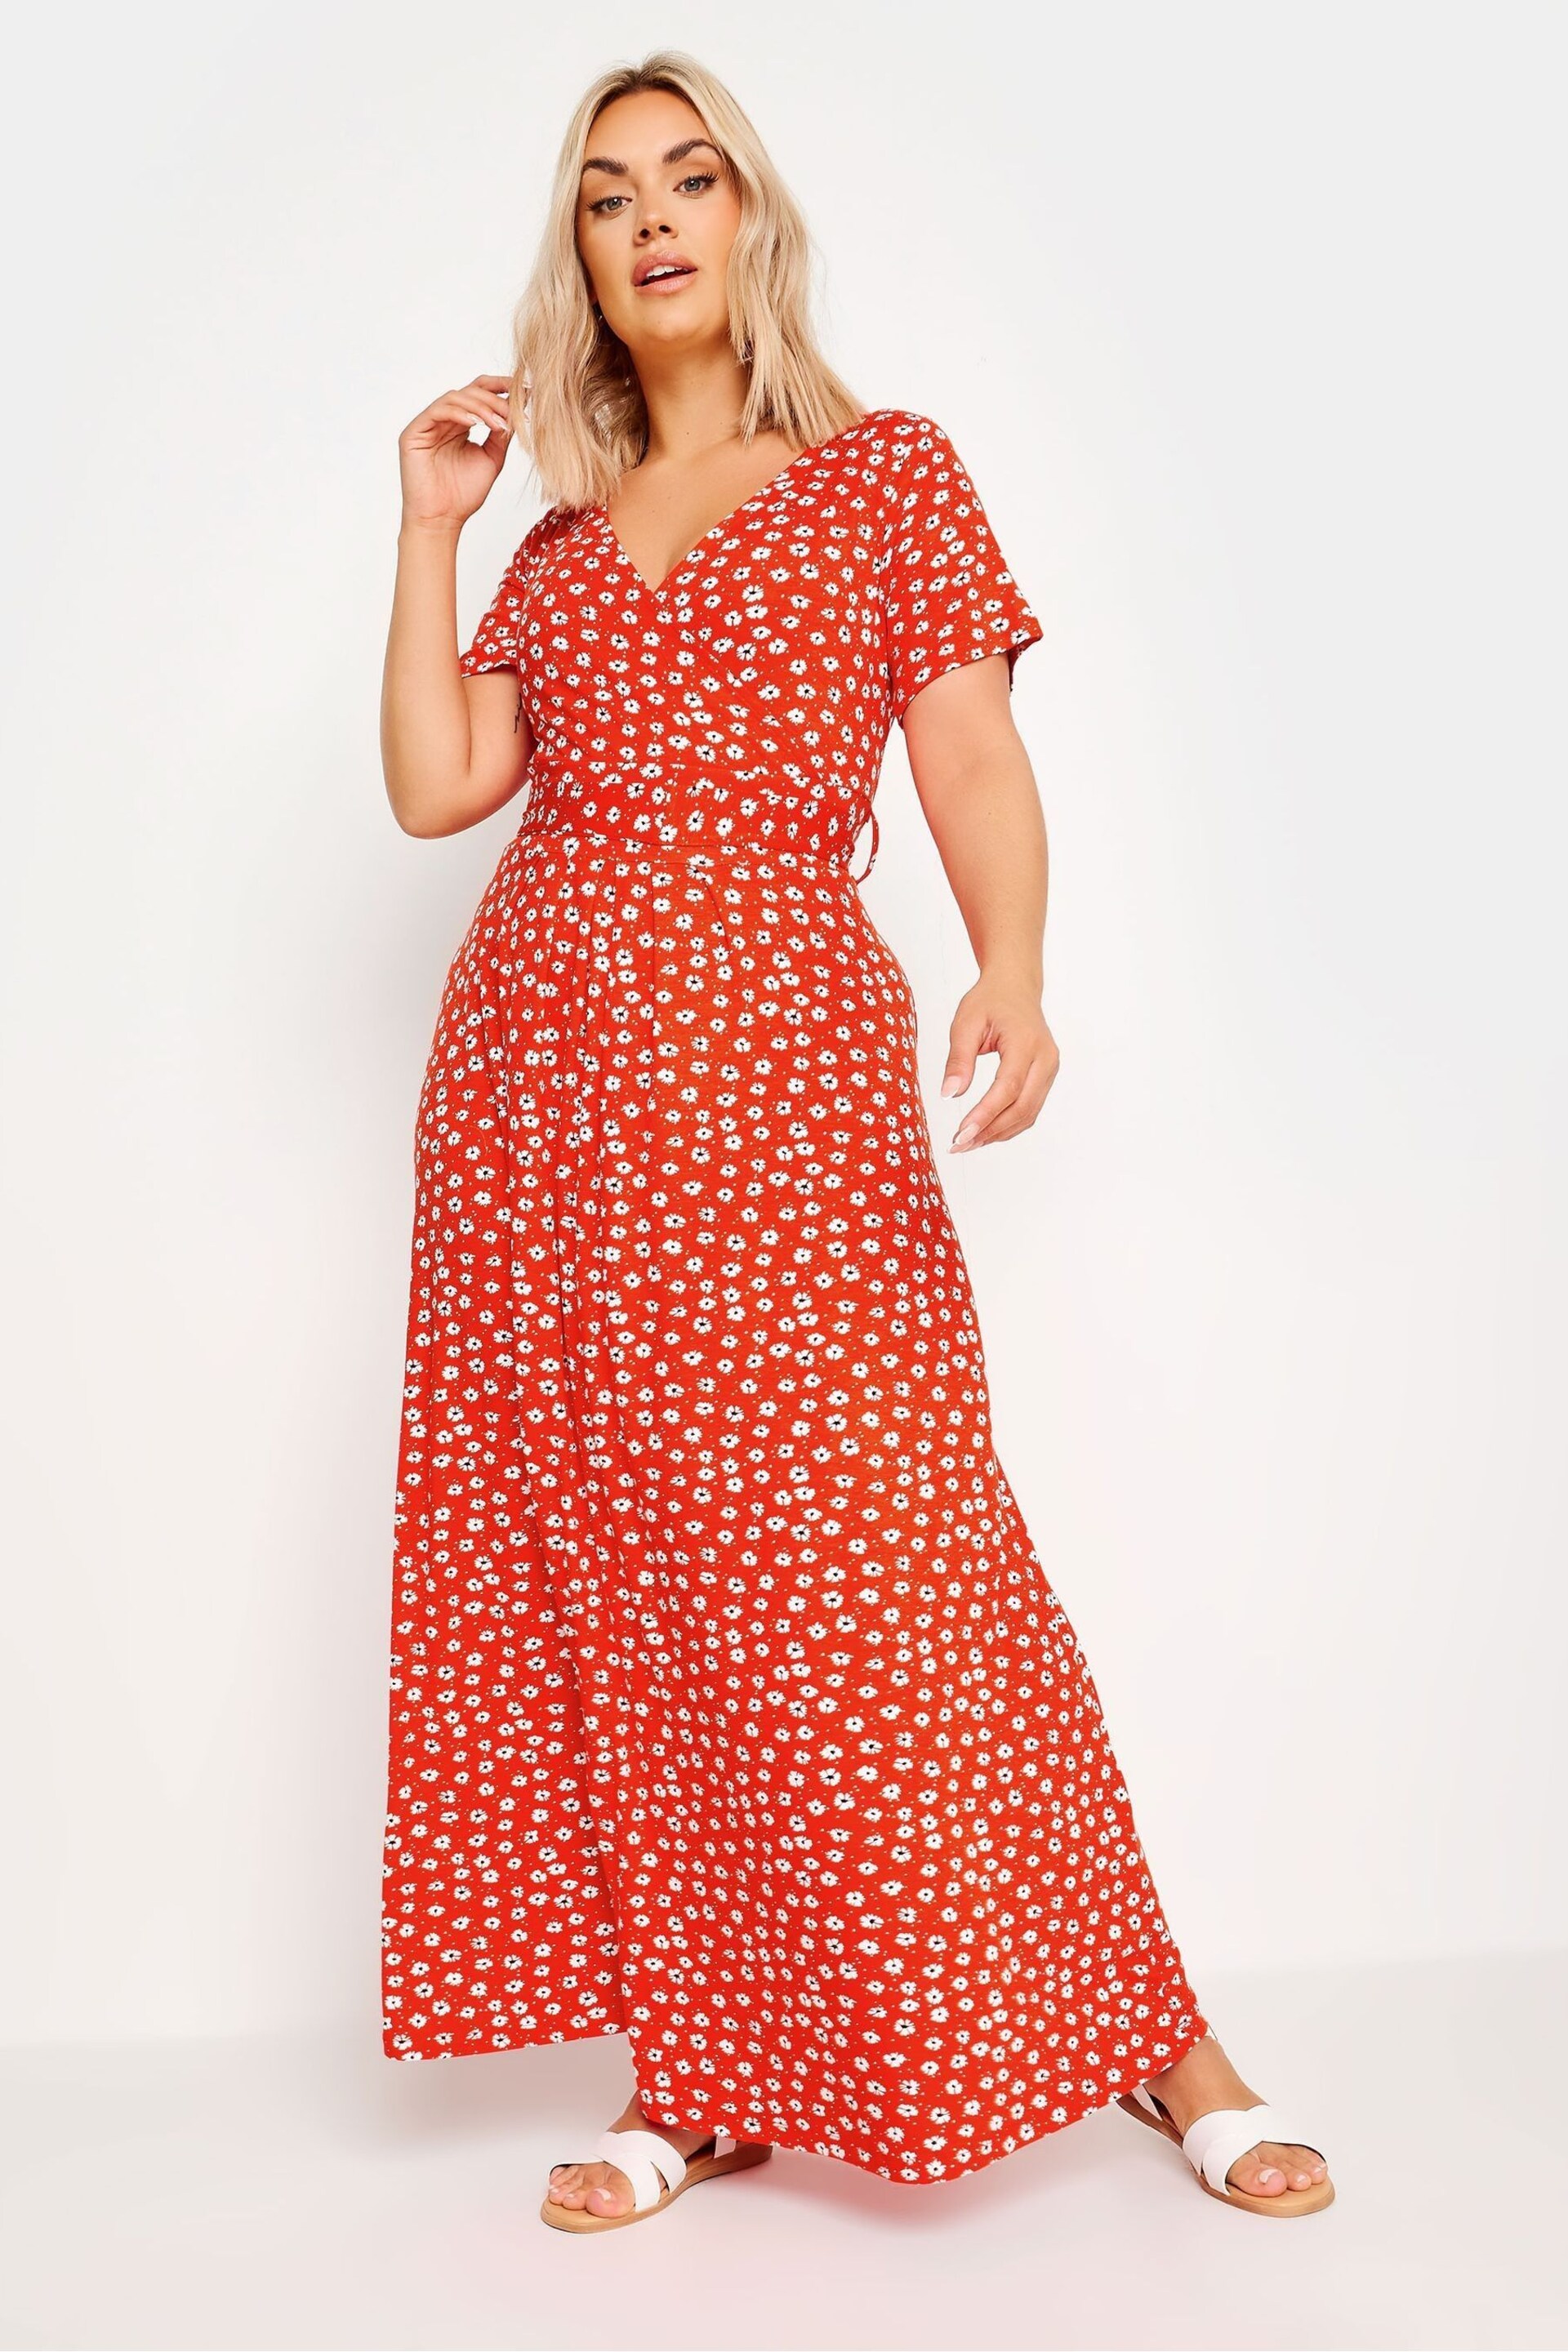 Yours Curve Orange Ditsy Floral Print Wrap Maxi Dress - Image 1 of 5